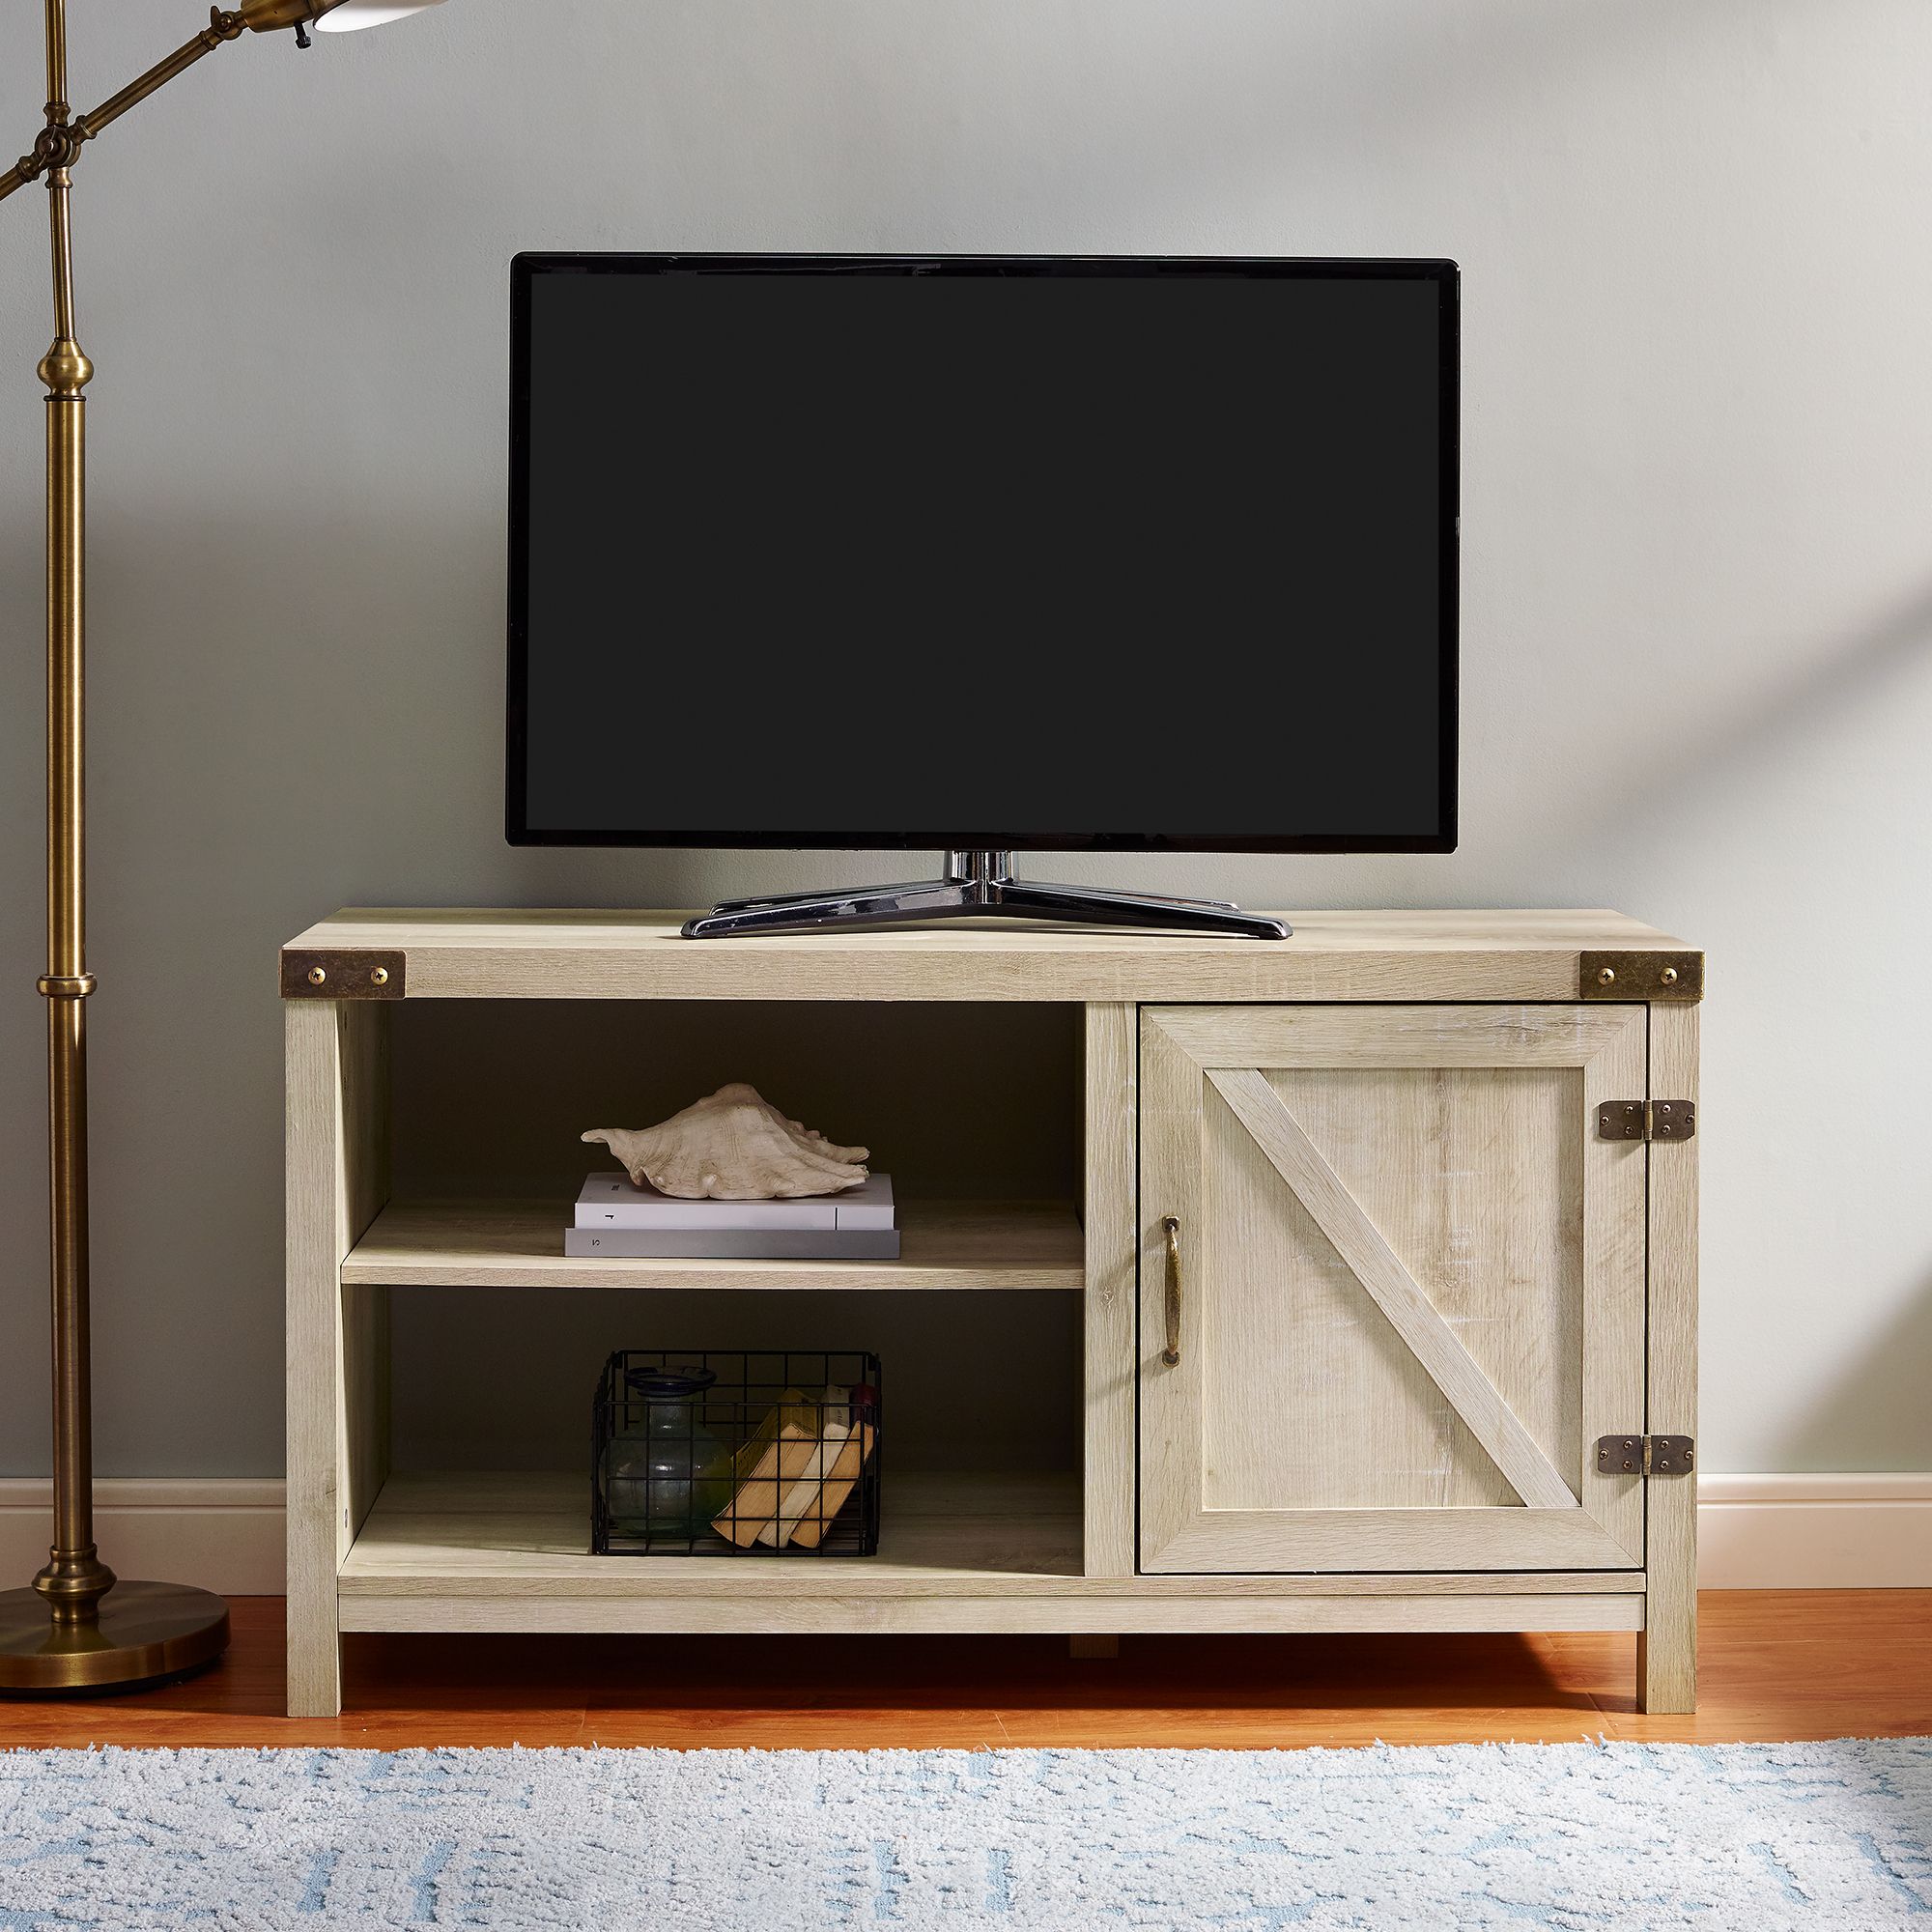 Woven Paths Farmhouse Barn Door Tv Stand For Tvs Up To 50 Regarding Tv Stands For Tvs Up To 50" (Gallery 6 of 20)